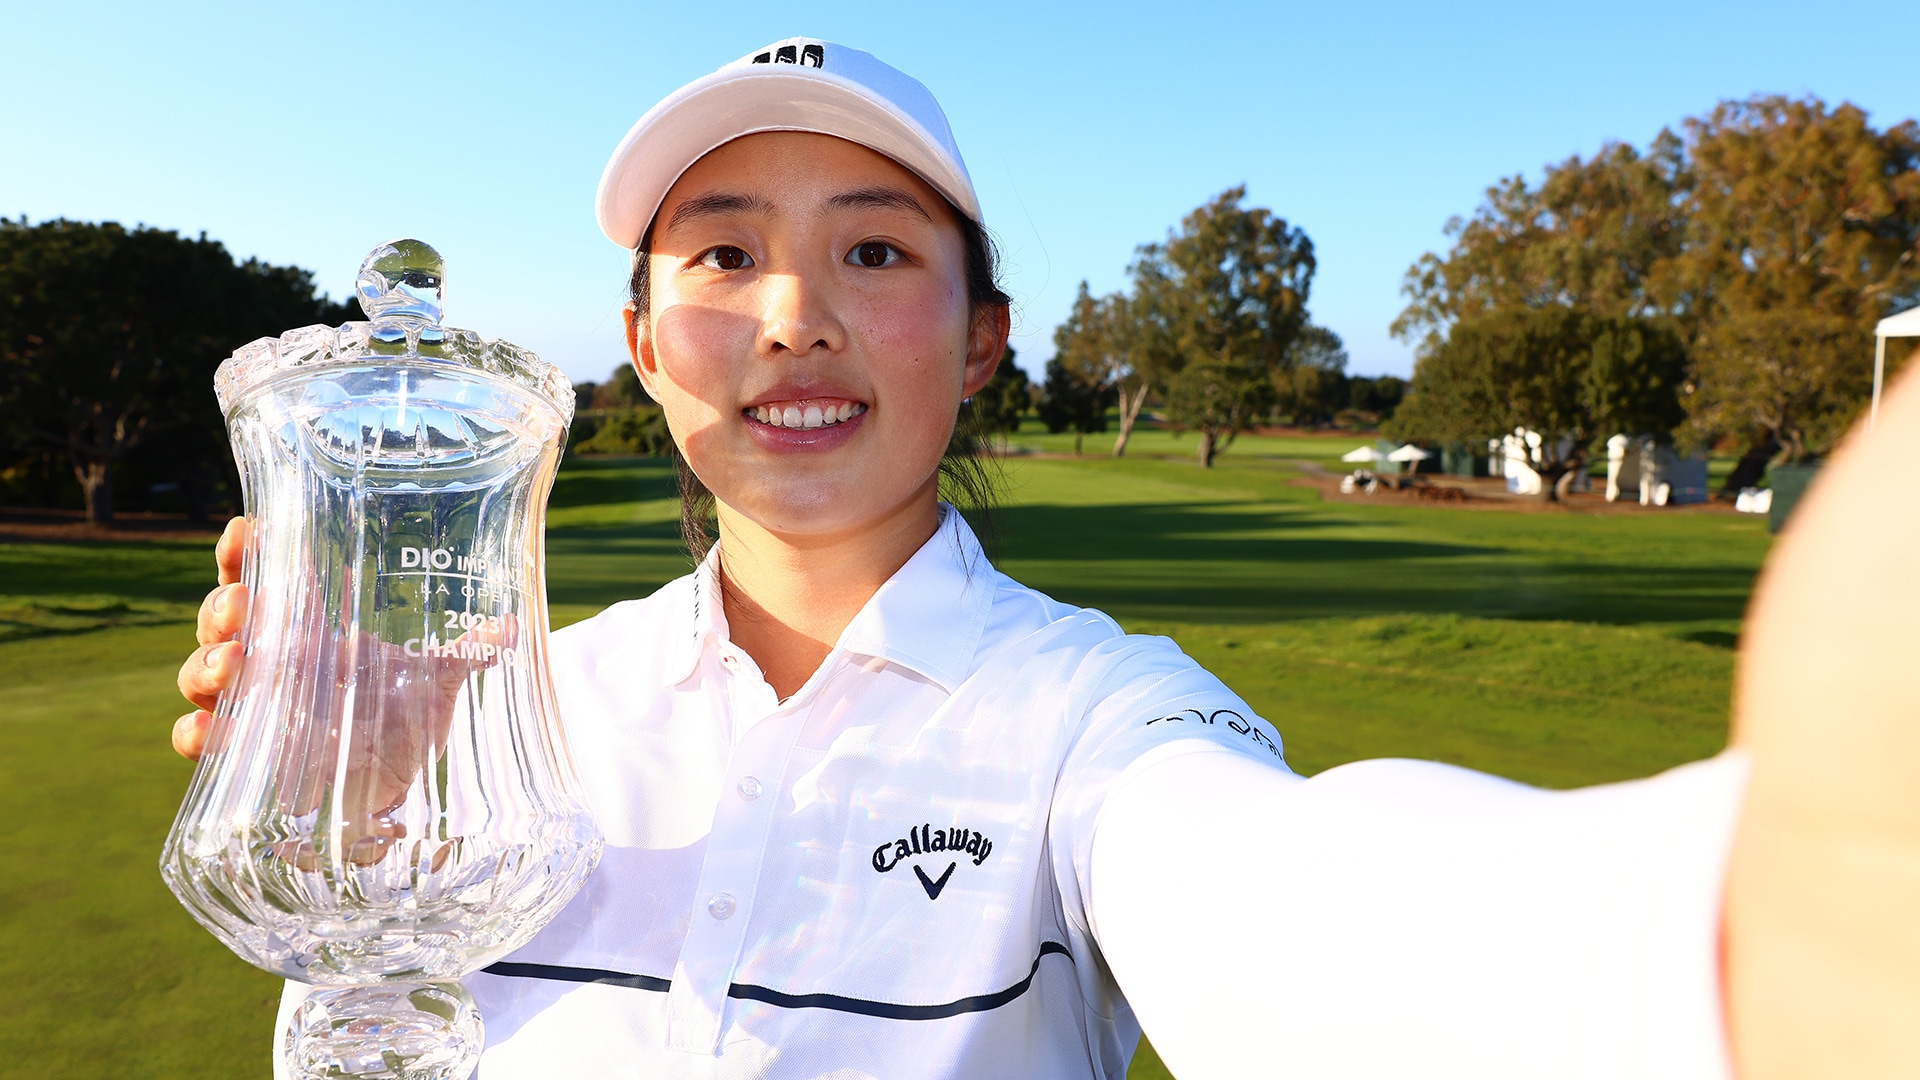 Ruoning Yin becomes China’s second LPGA Tour winner at DIO Implant LA Open